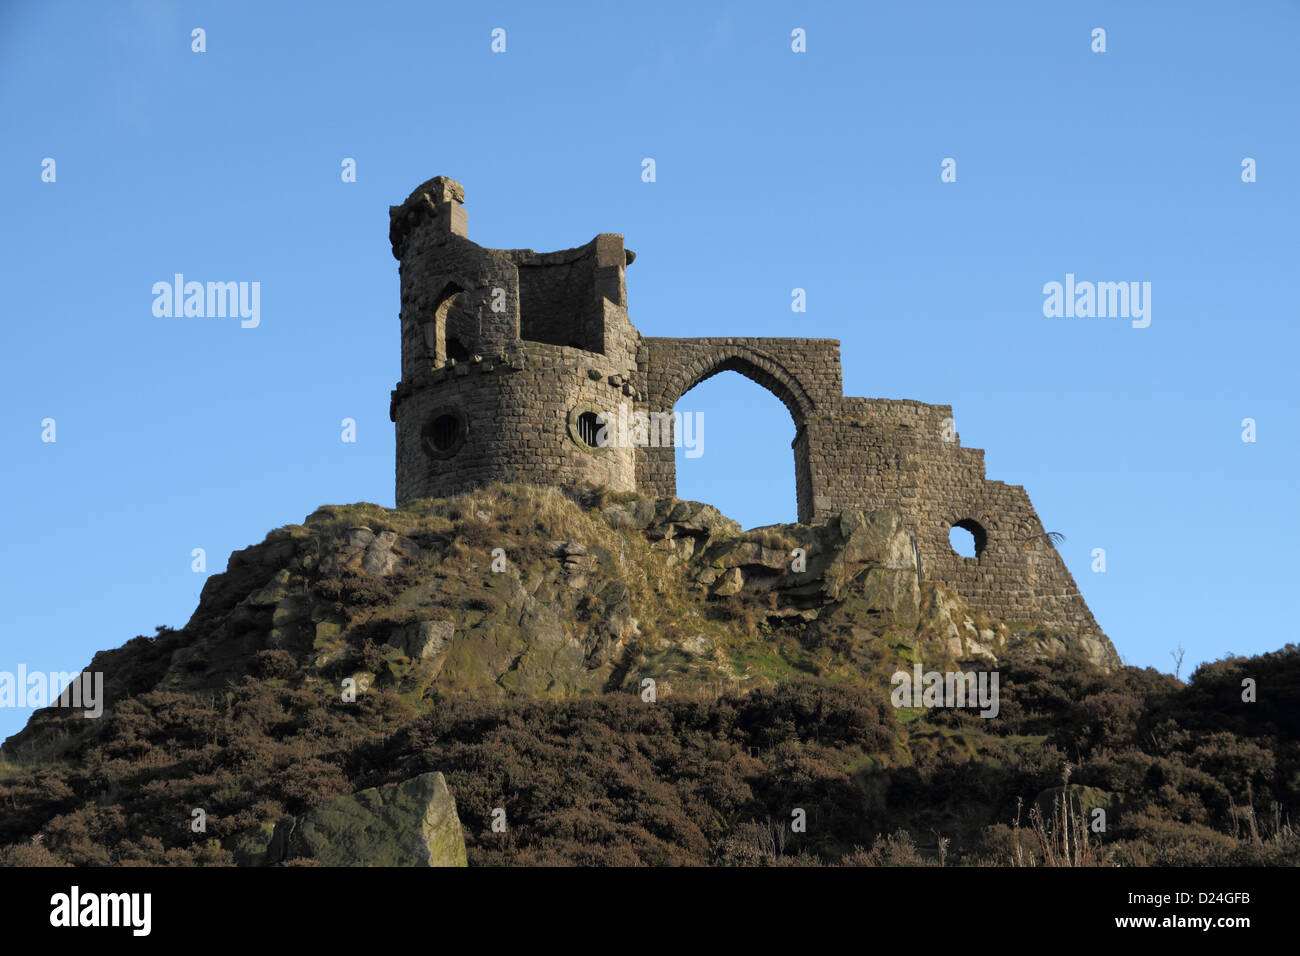 Mow Cop 'castle' (folly) near Stoke-on-Trent, on the Staffs / Cheshire border, UK Stock Photo